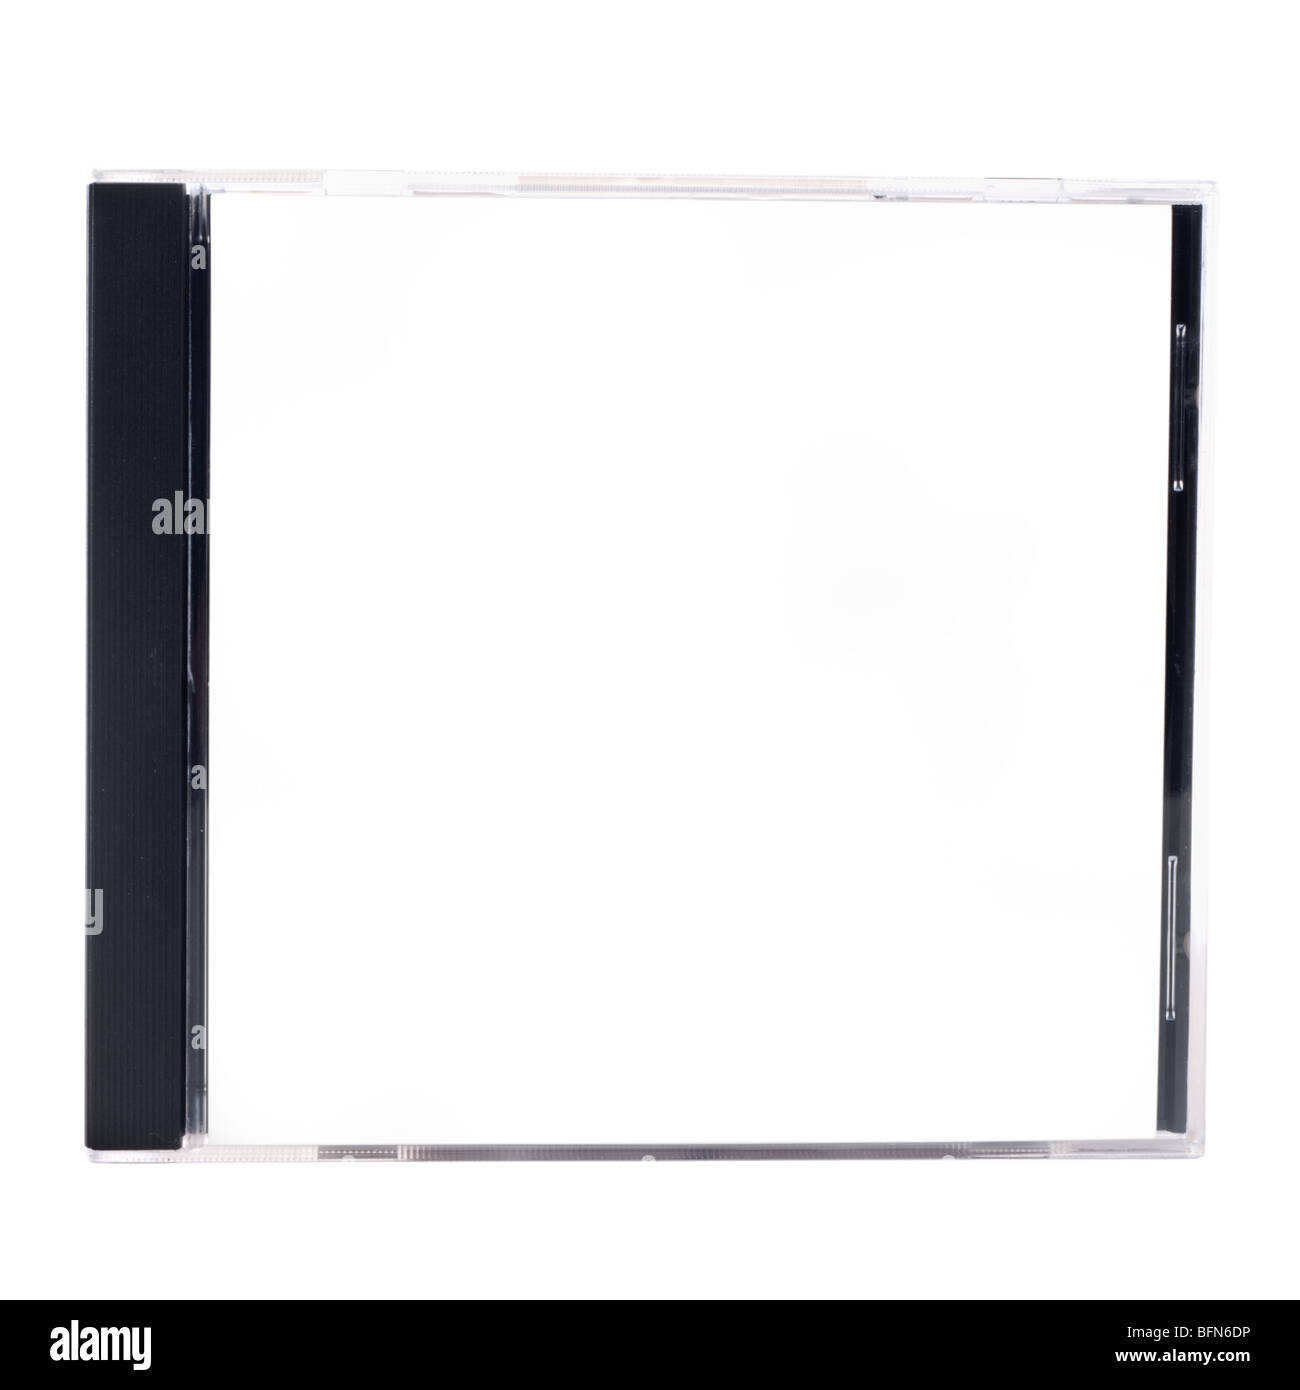 A blank CD case on a white background Stock Photo